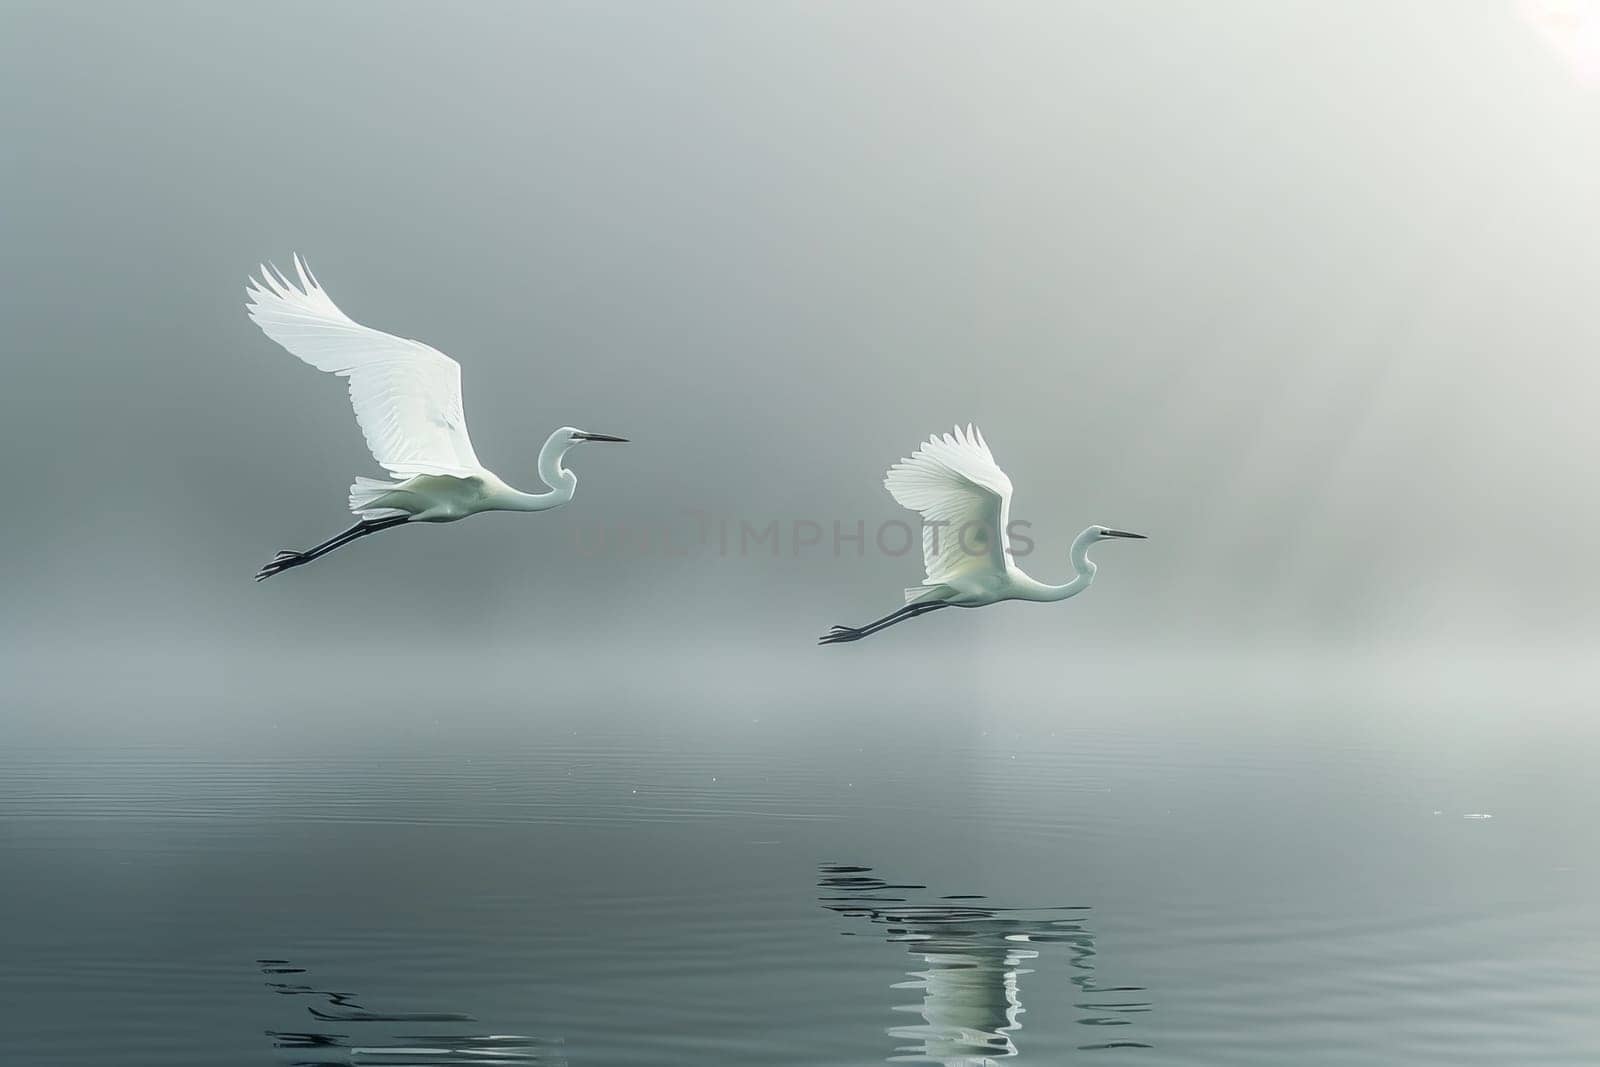 A white bird is flying over a body of water. The water is calm and still, with ripples forming around the bird. The scene is peaceful and serene, with the bird soaring high above the water